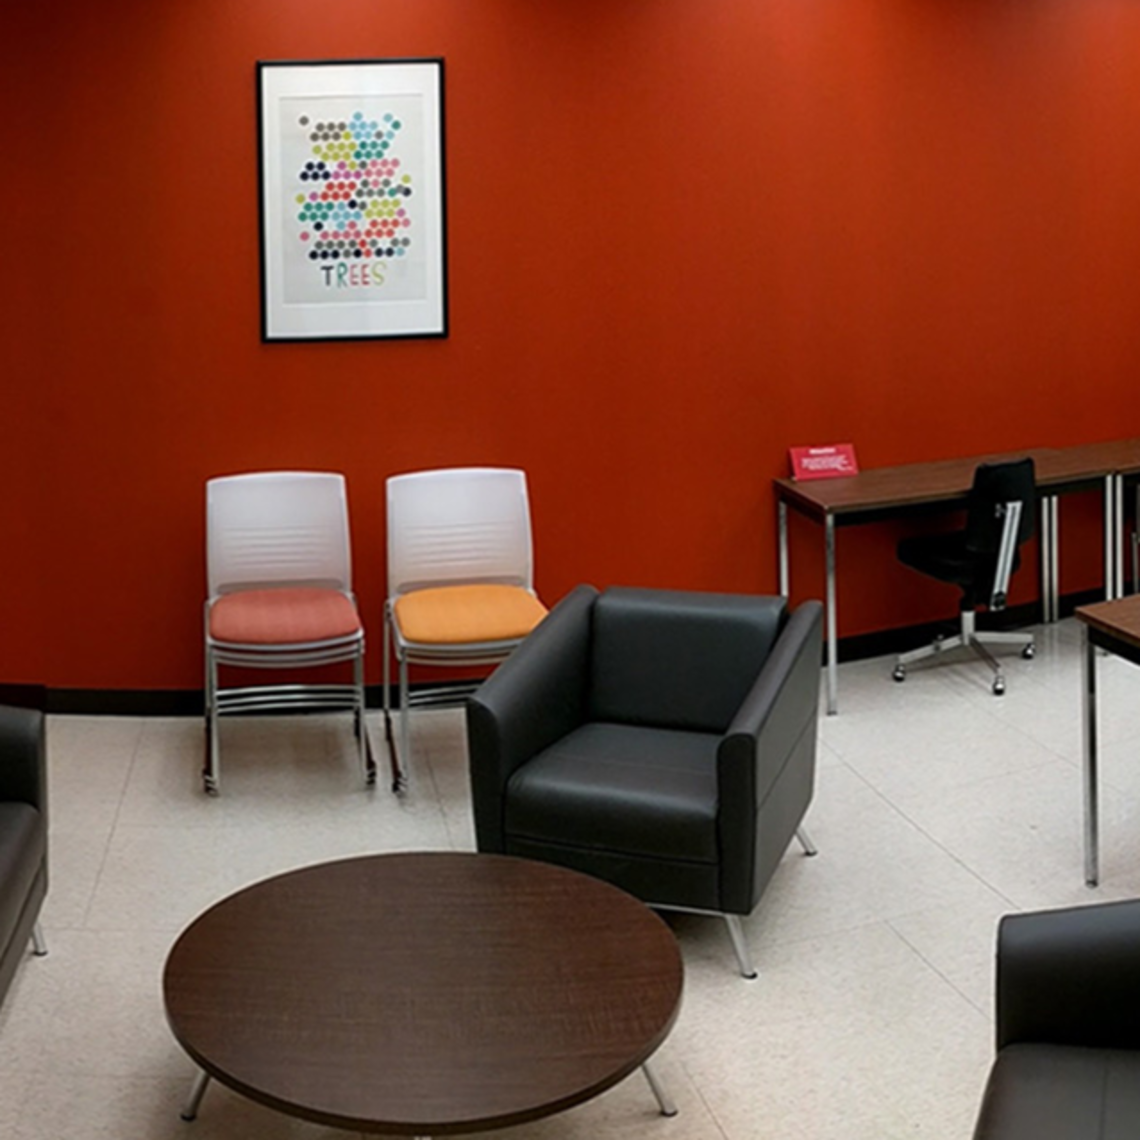 The English Grad Lounge includes sitting and working areas